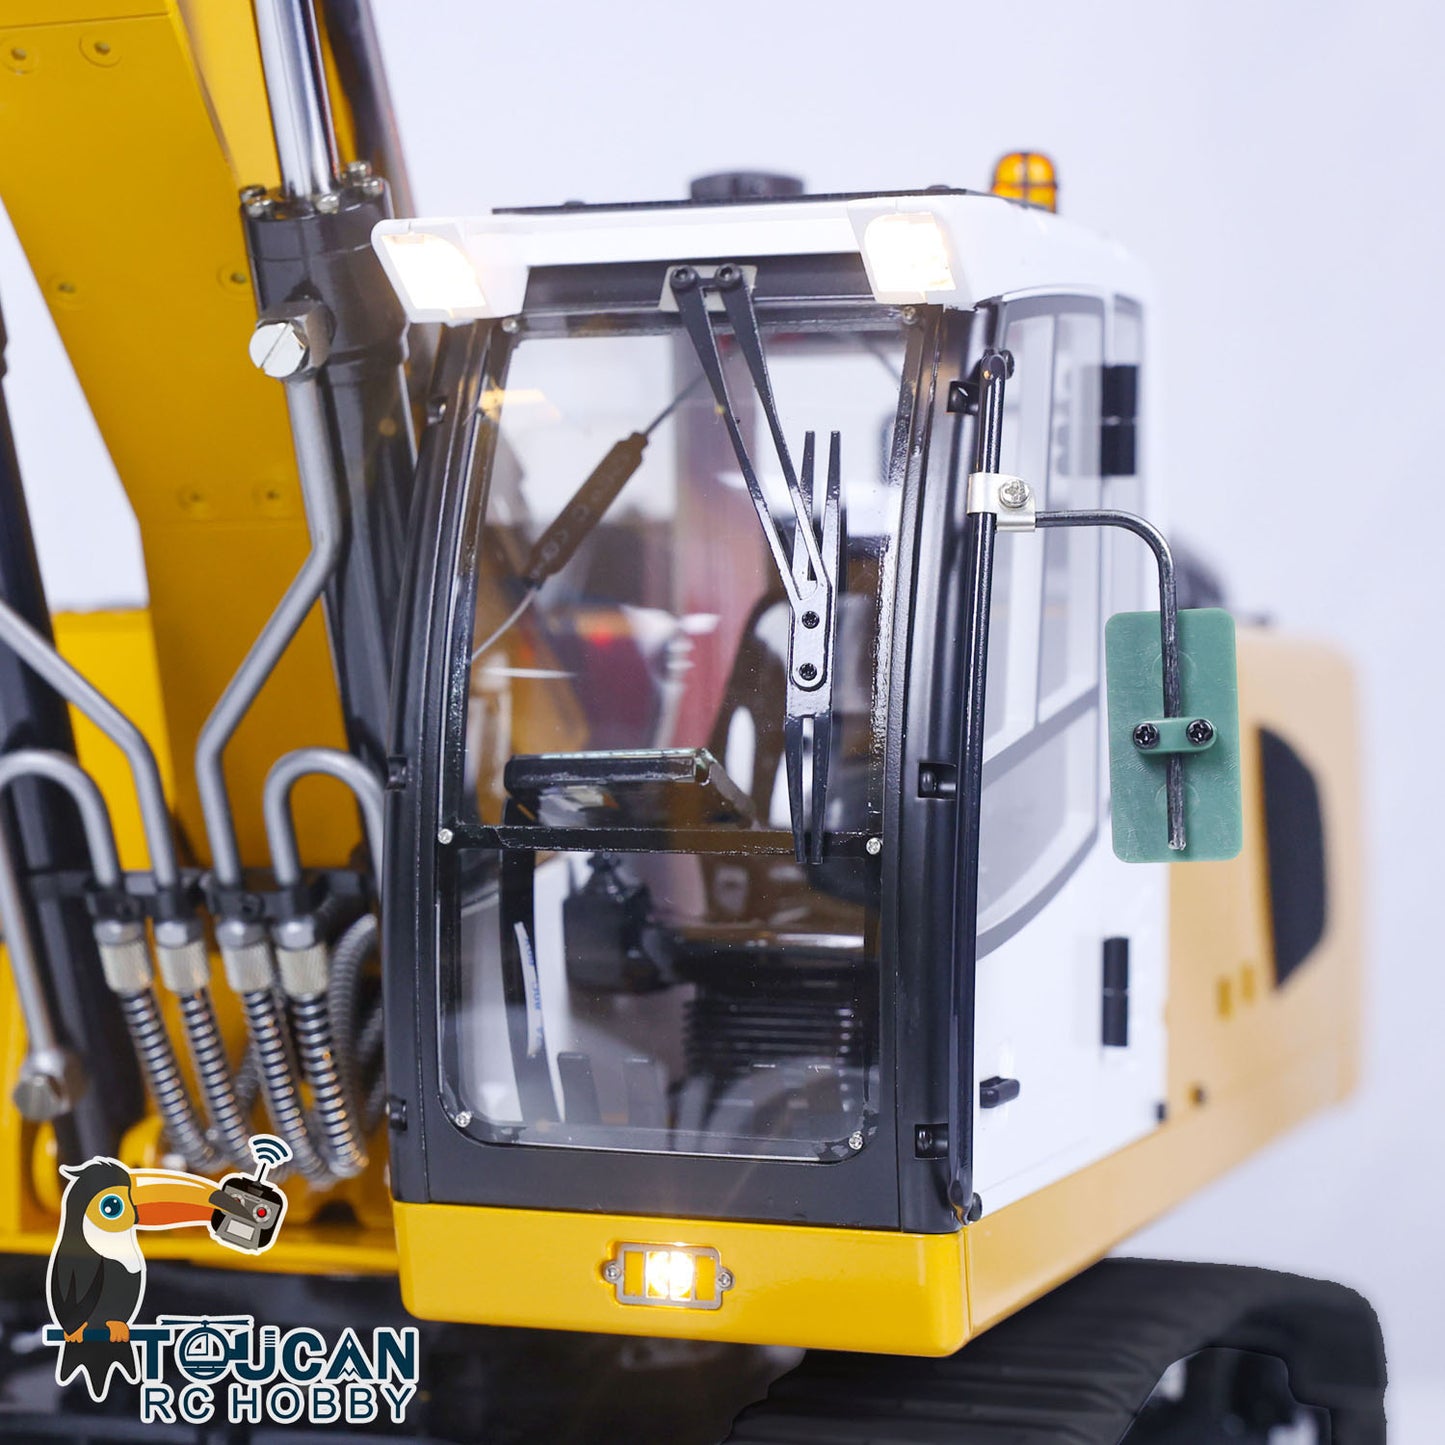 MTMODEL 1/14 946 Metal RC Hydraulic Excavator Wireless Controlled Construction Machine 2 Arms Model Clamshell Bucket Ripper